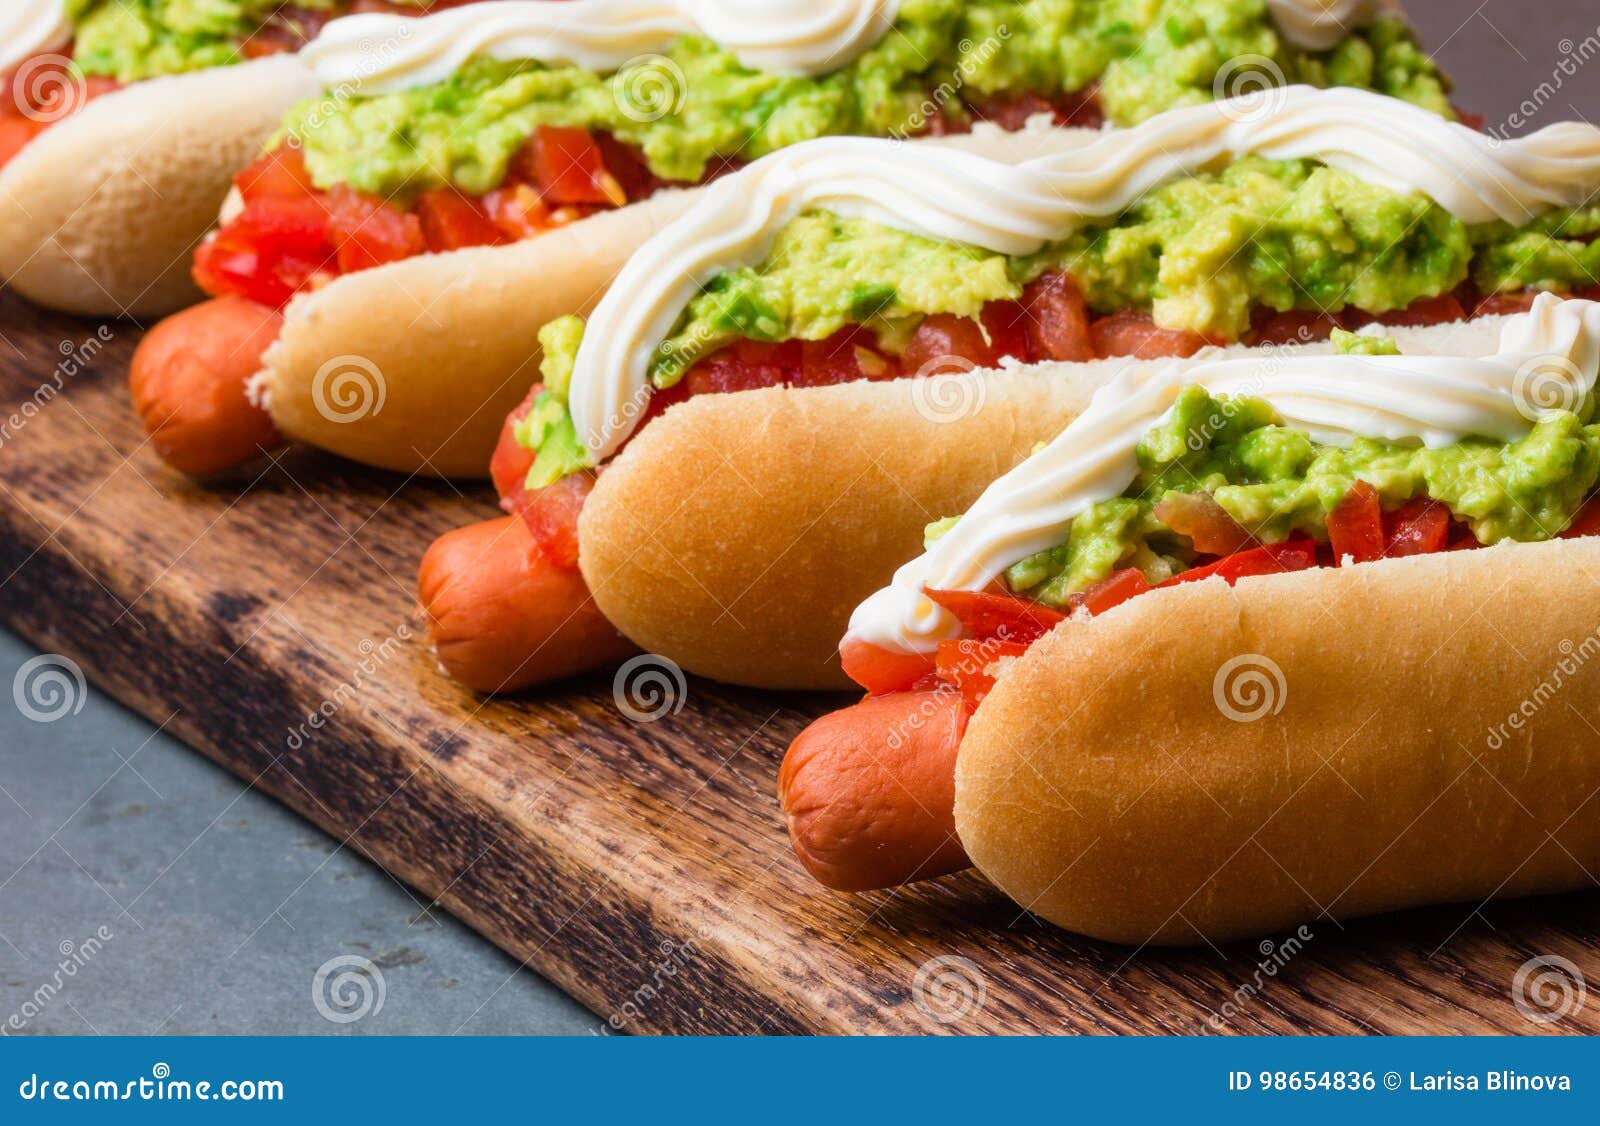 chilean completo italiano. hot dog sandwiches with tomato, avocado and mayonnaise on wooden board. closeup